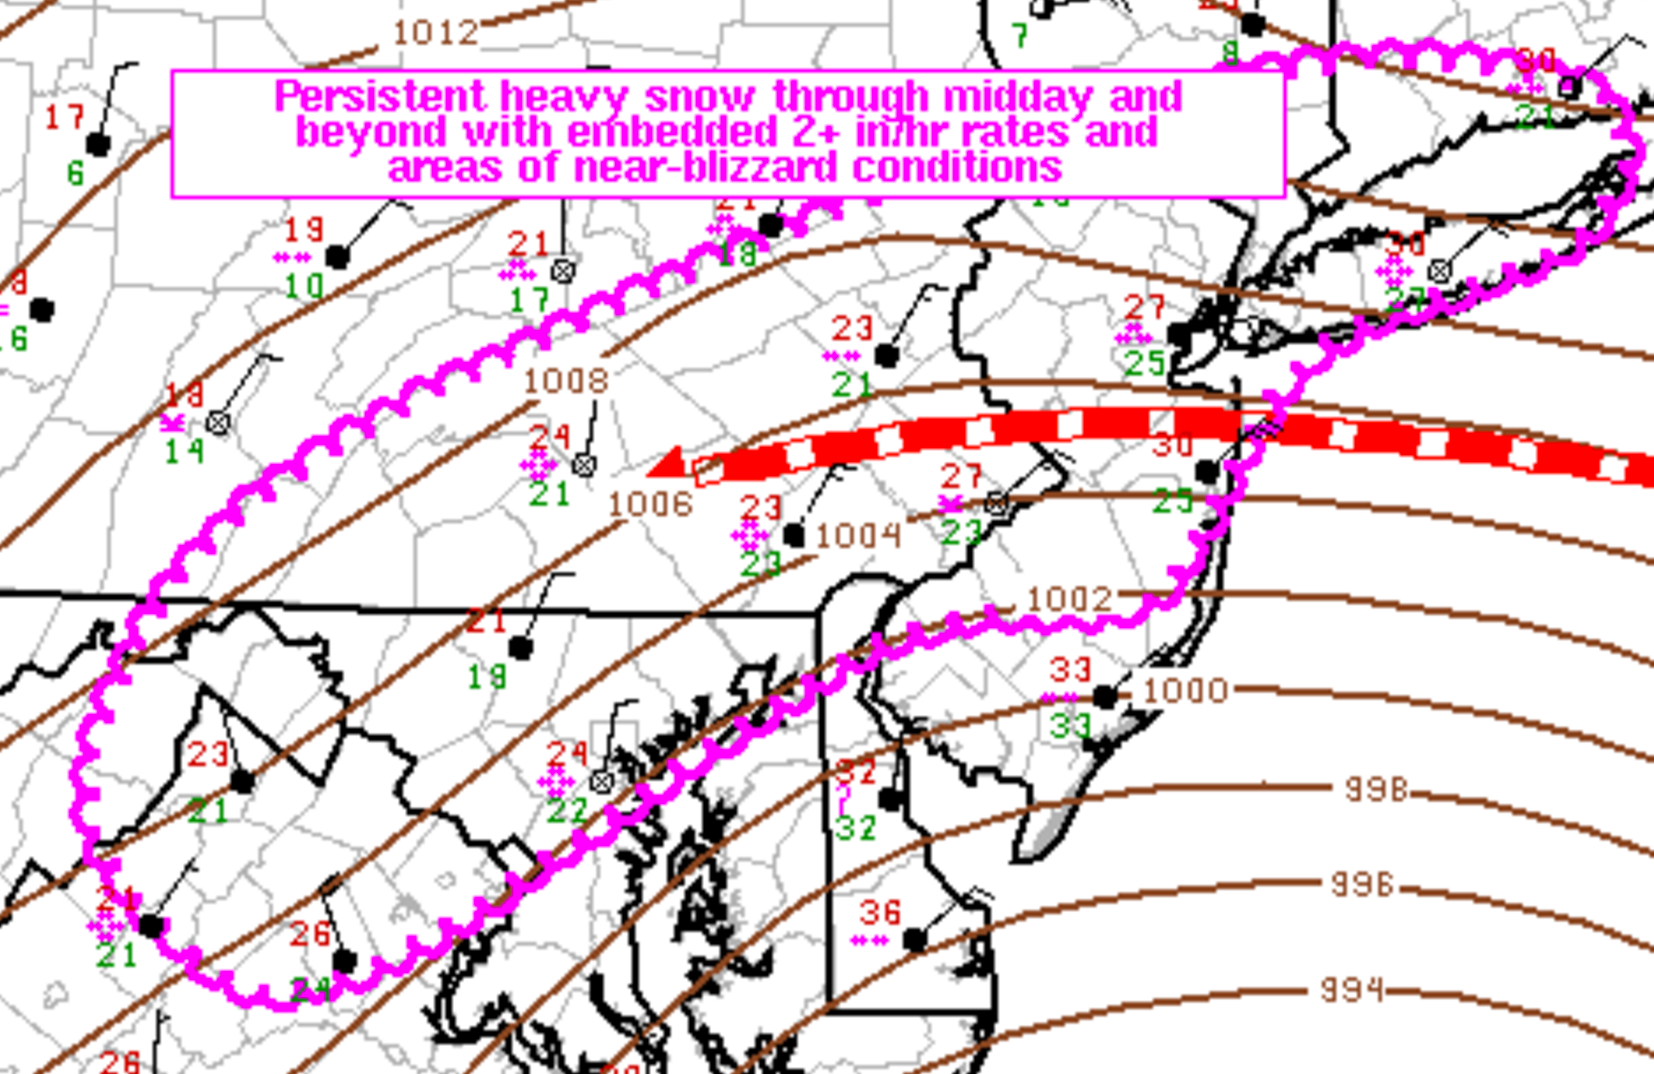  (Image: National Weather Service Storm Prediction Center) 